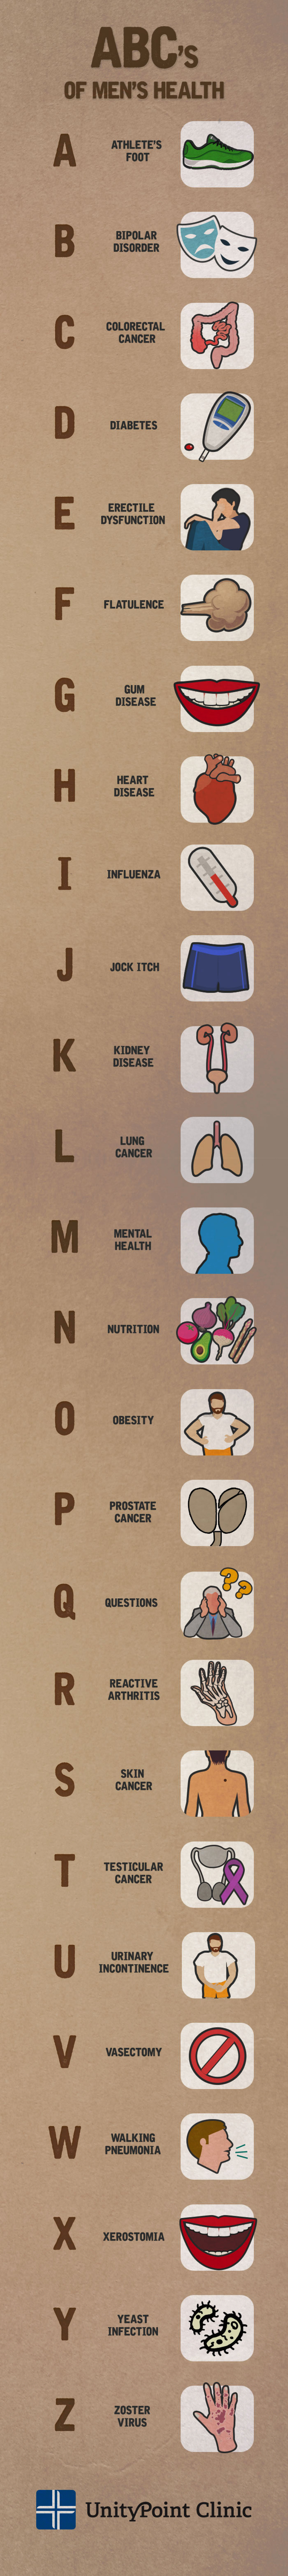 The A-Z Guide to Men's Health  Infographic